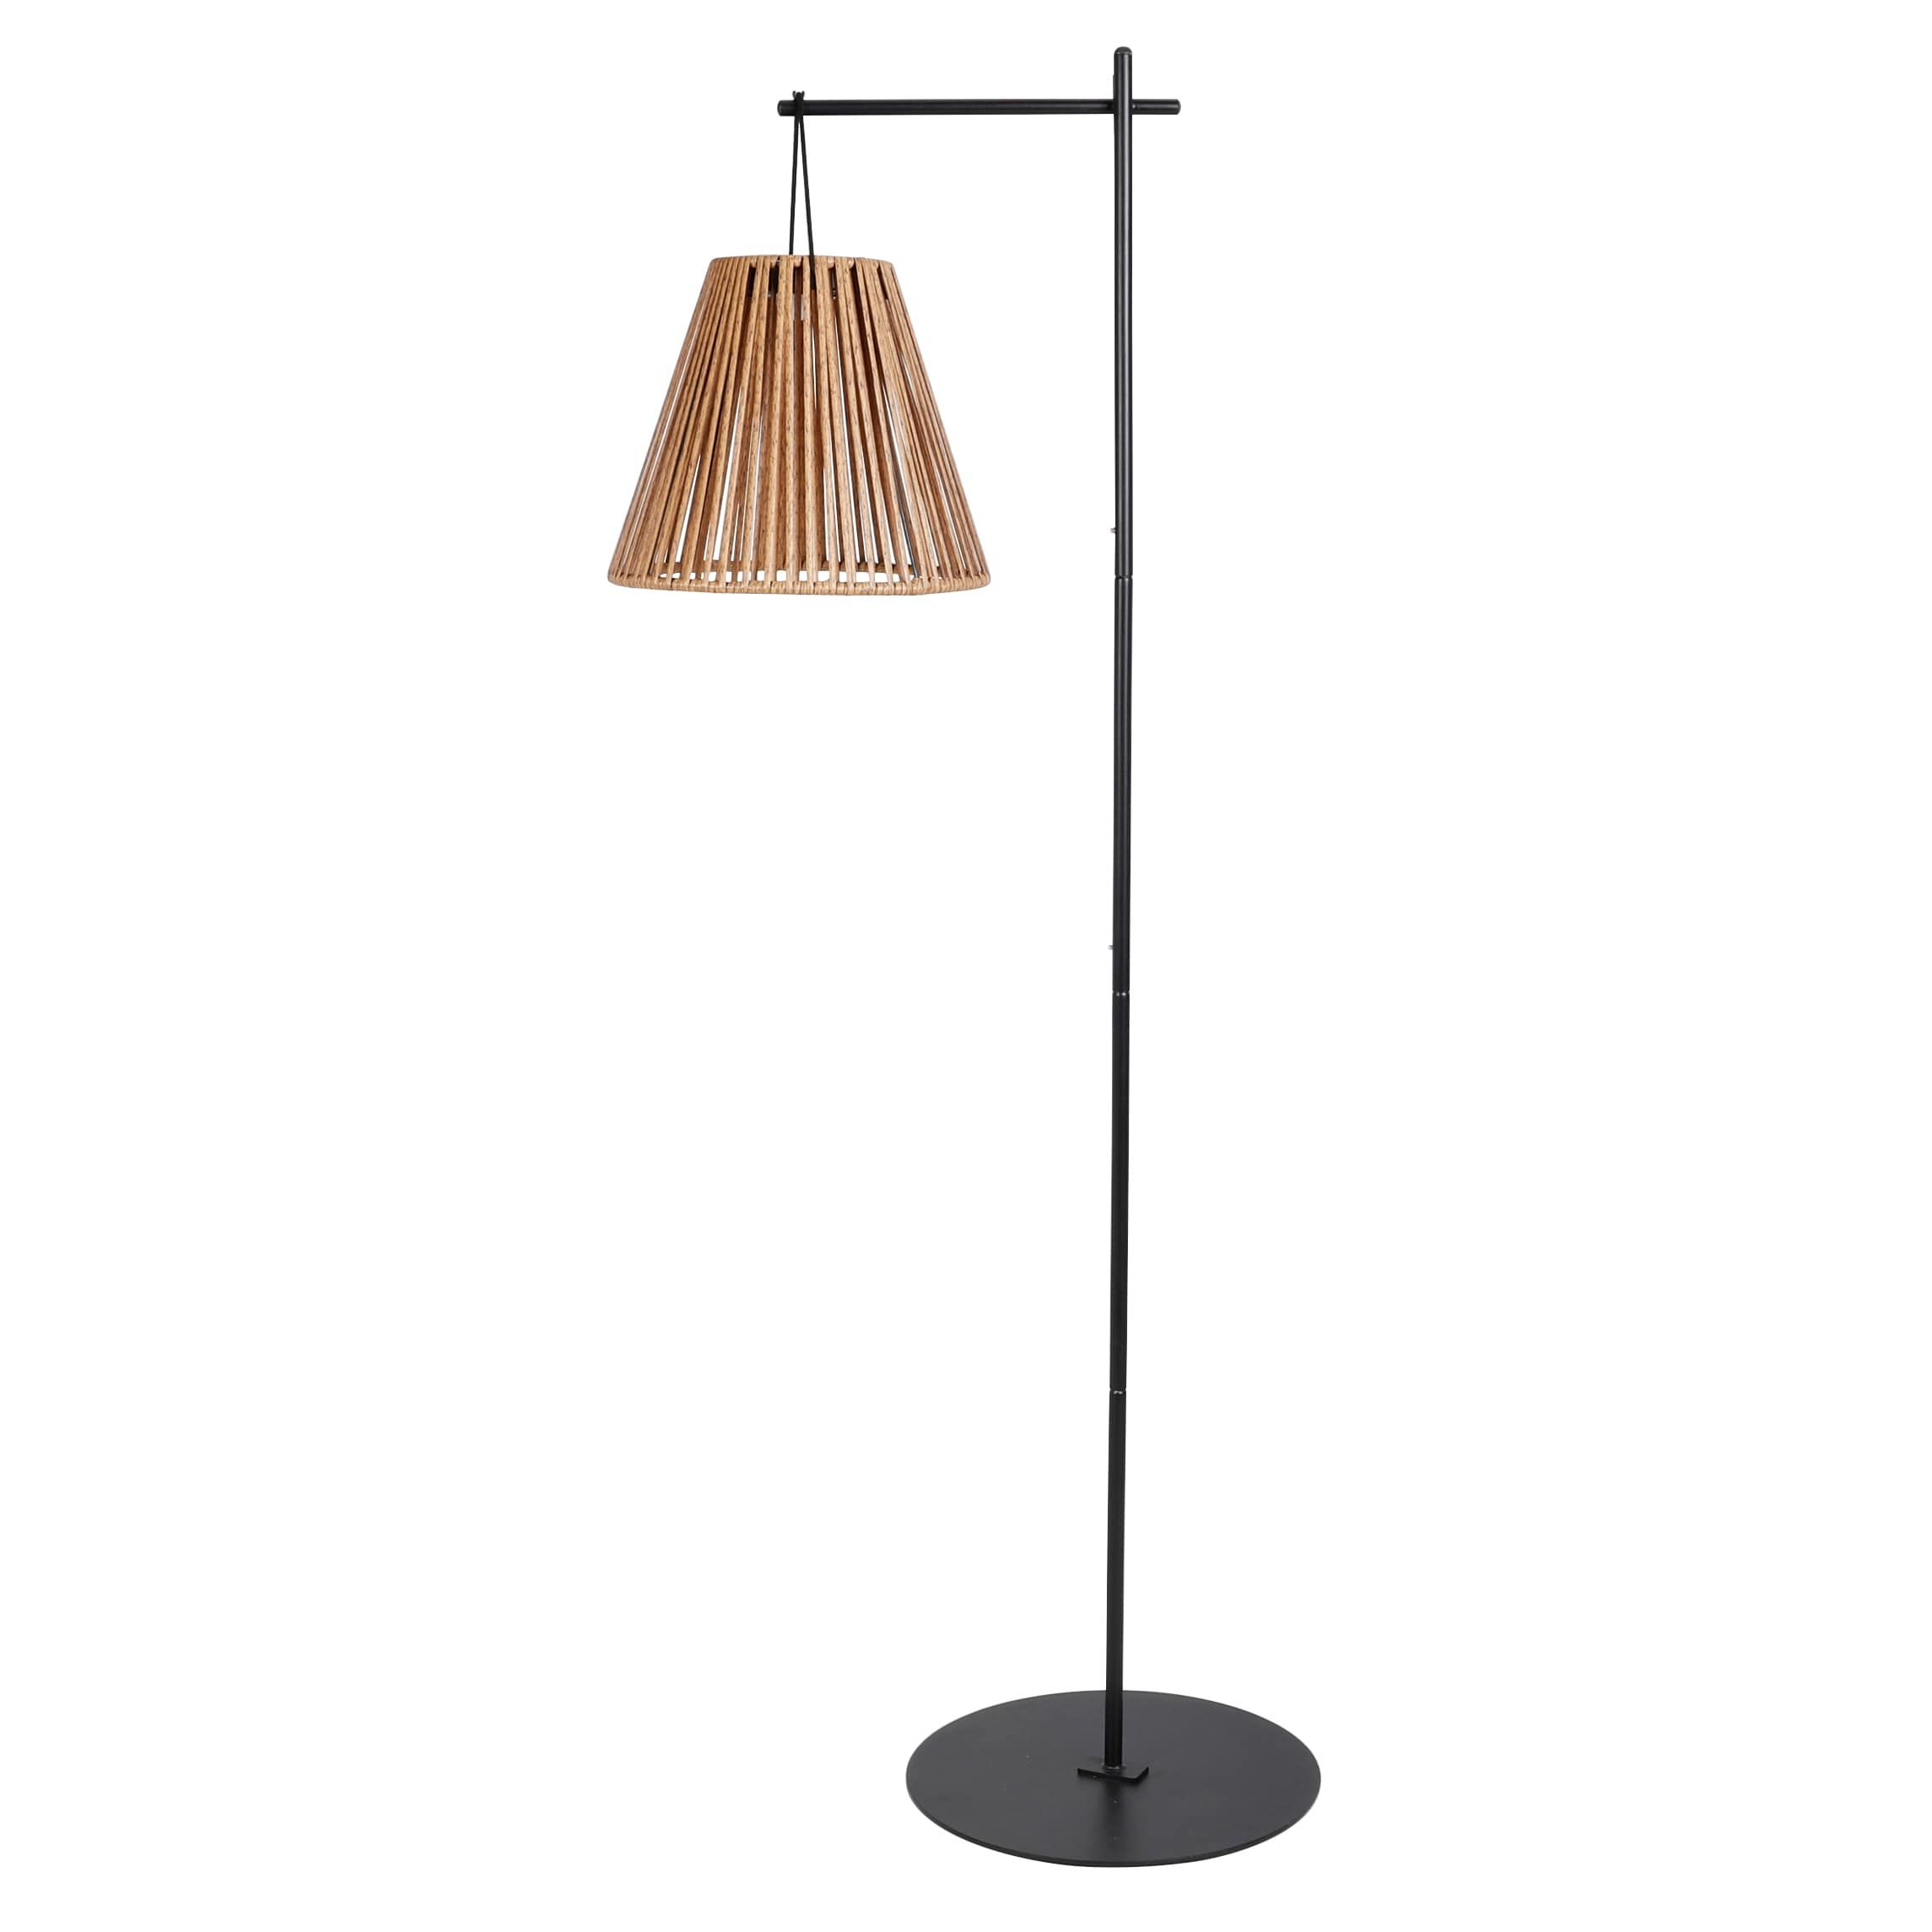 Origin 21 Southaven 70 In Black Floor Lamp At Lowes Pertaining To Rattan Floor Lamps (View 12 of 15)